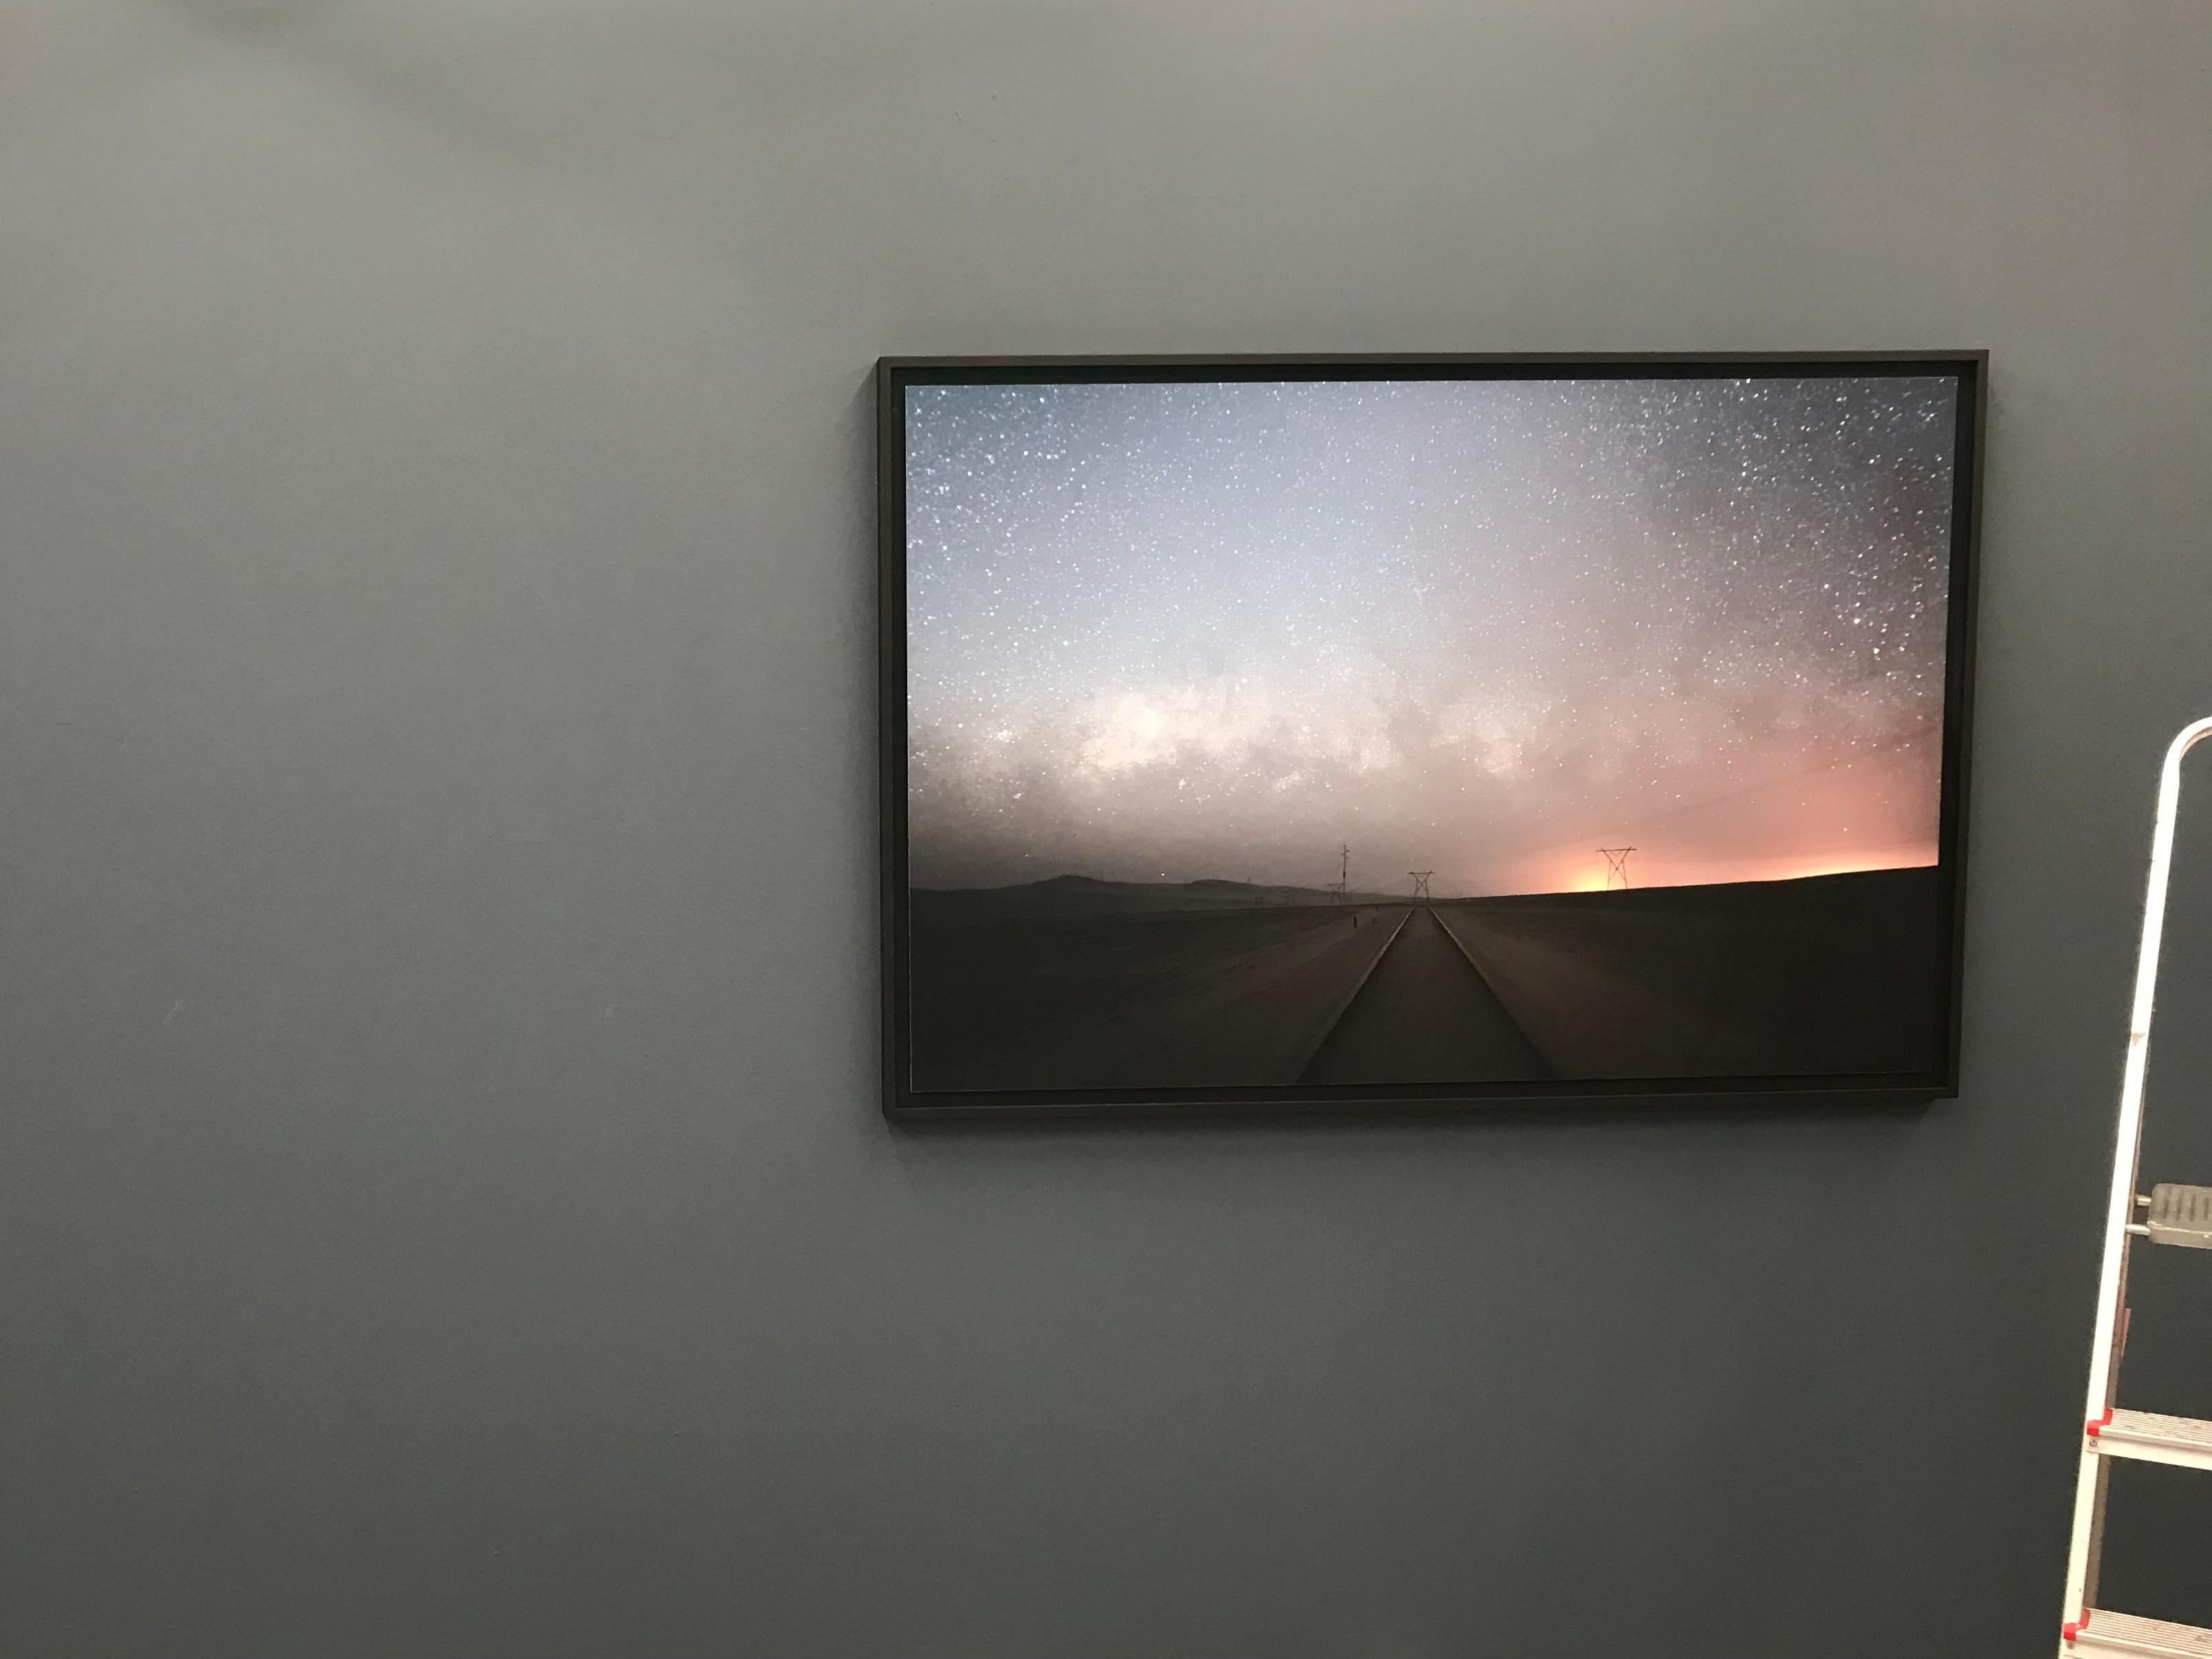 Black floating frame, museum glass
Size : 100x150cm / 104x154cm with frame
Edition 1/3

This artwork is a part of the Zero F*cks Given project. First time exhibited in 2019 in Zurich, Switzerland.

Photographer and contemporary artist Anna